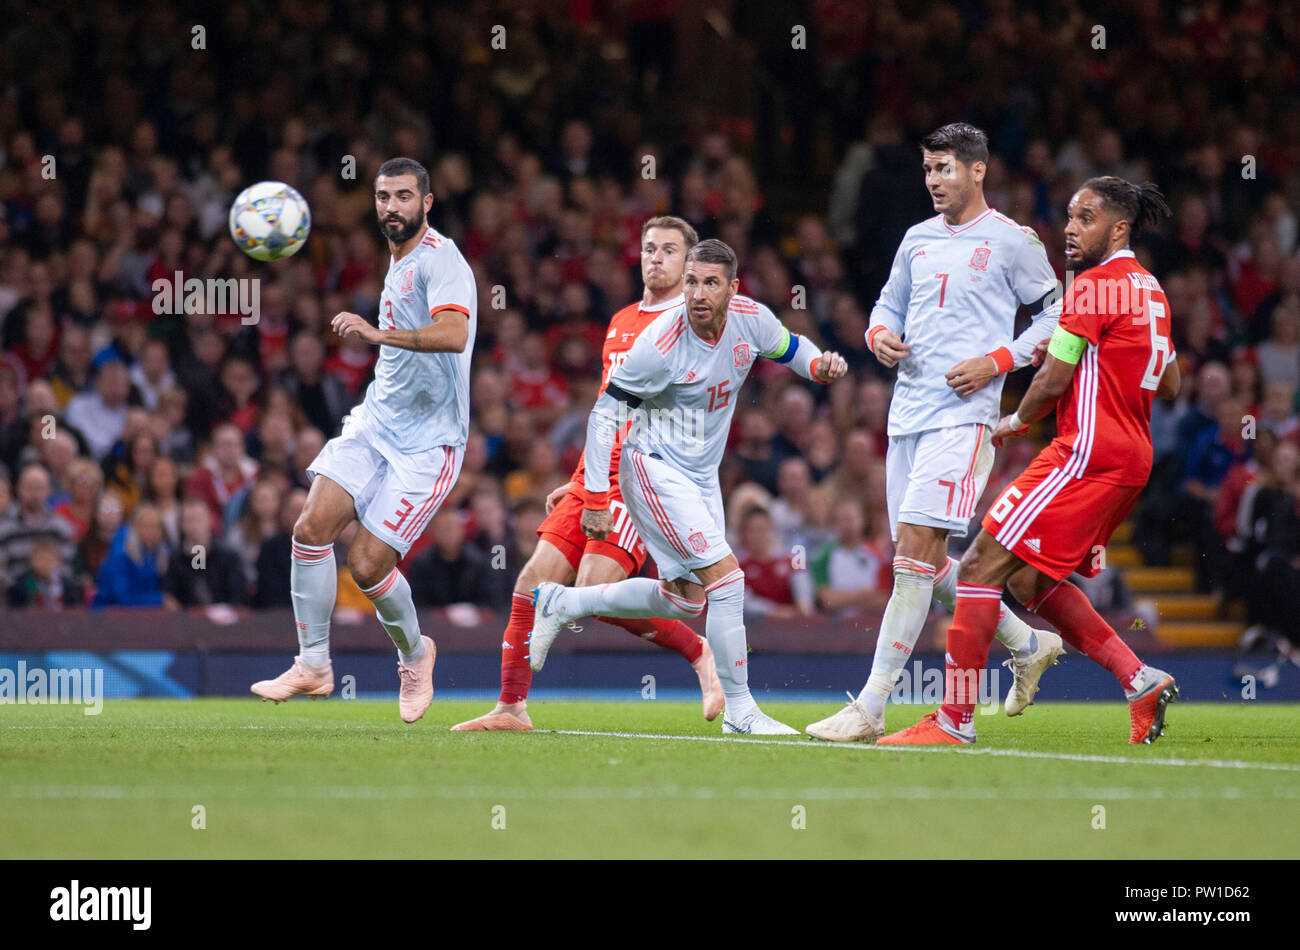 Cardiff - Wales - UK - 11th October 2018 International friendly between Wales and Spain at the National Stadium of Wales : Spain Captain Sergio Ramos scores a goal. Credit: Phil Rees/Alamy Live News Stock Photo